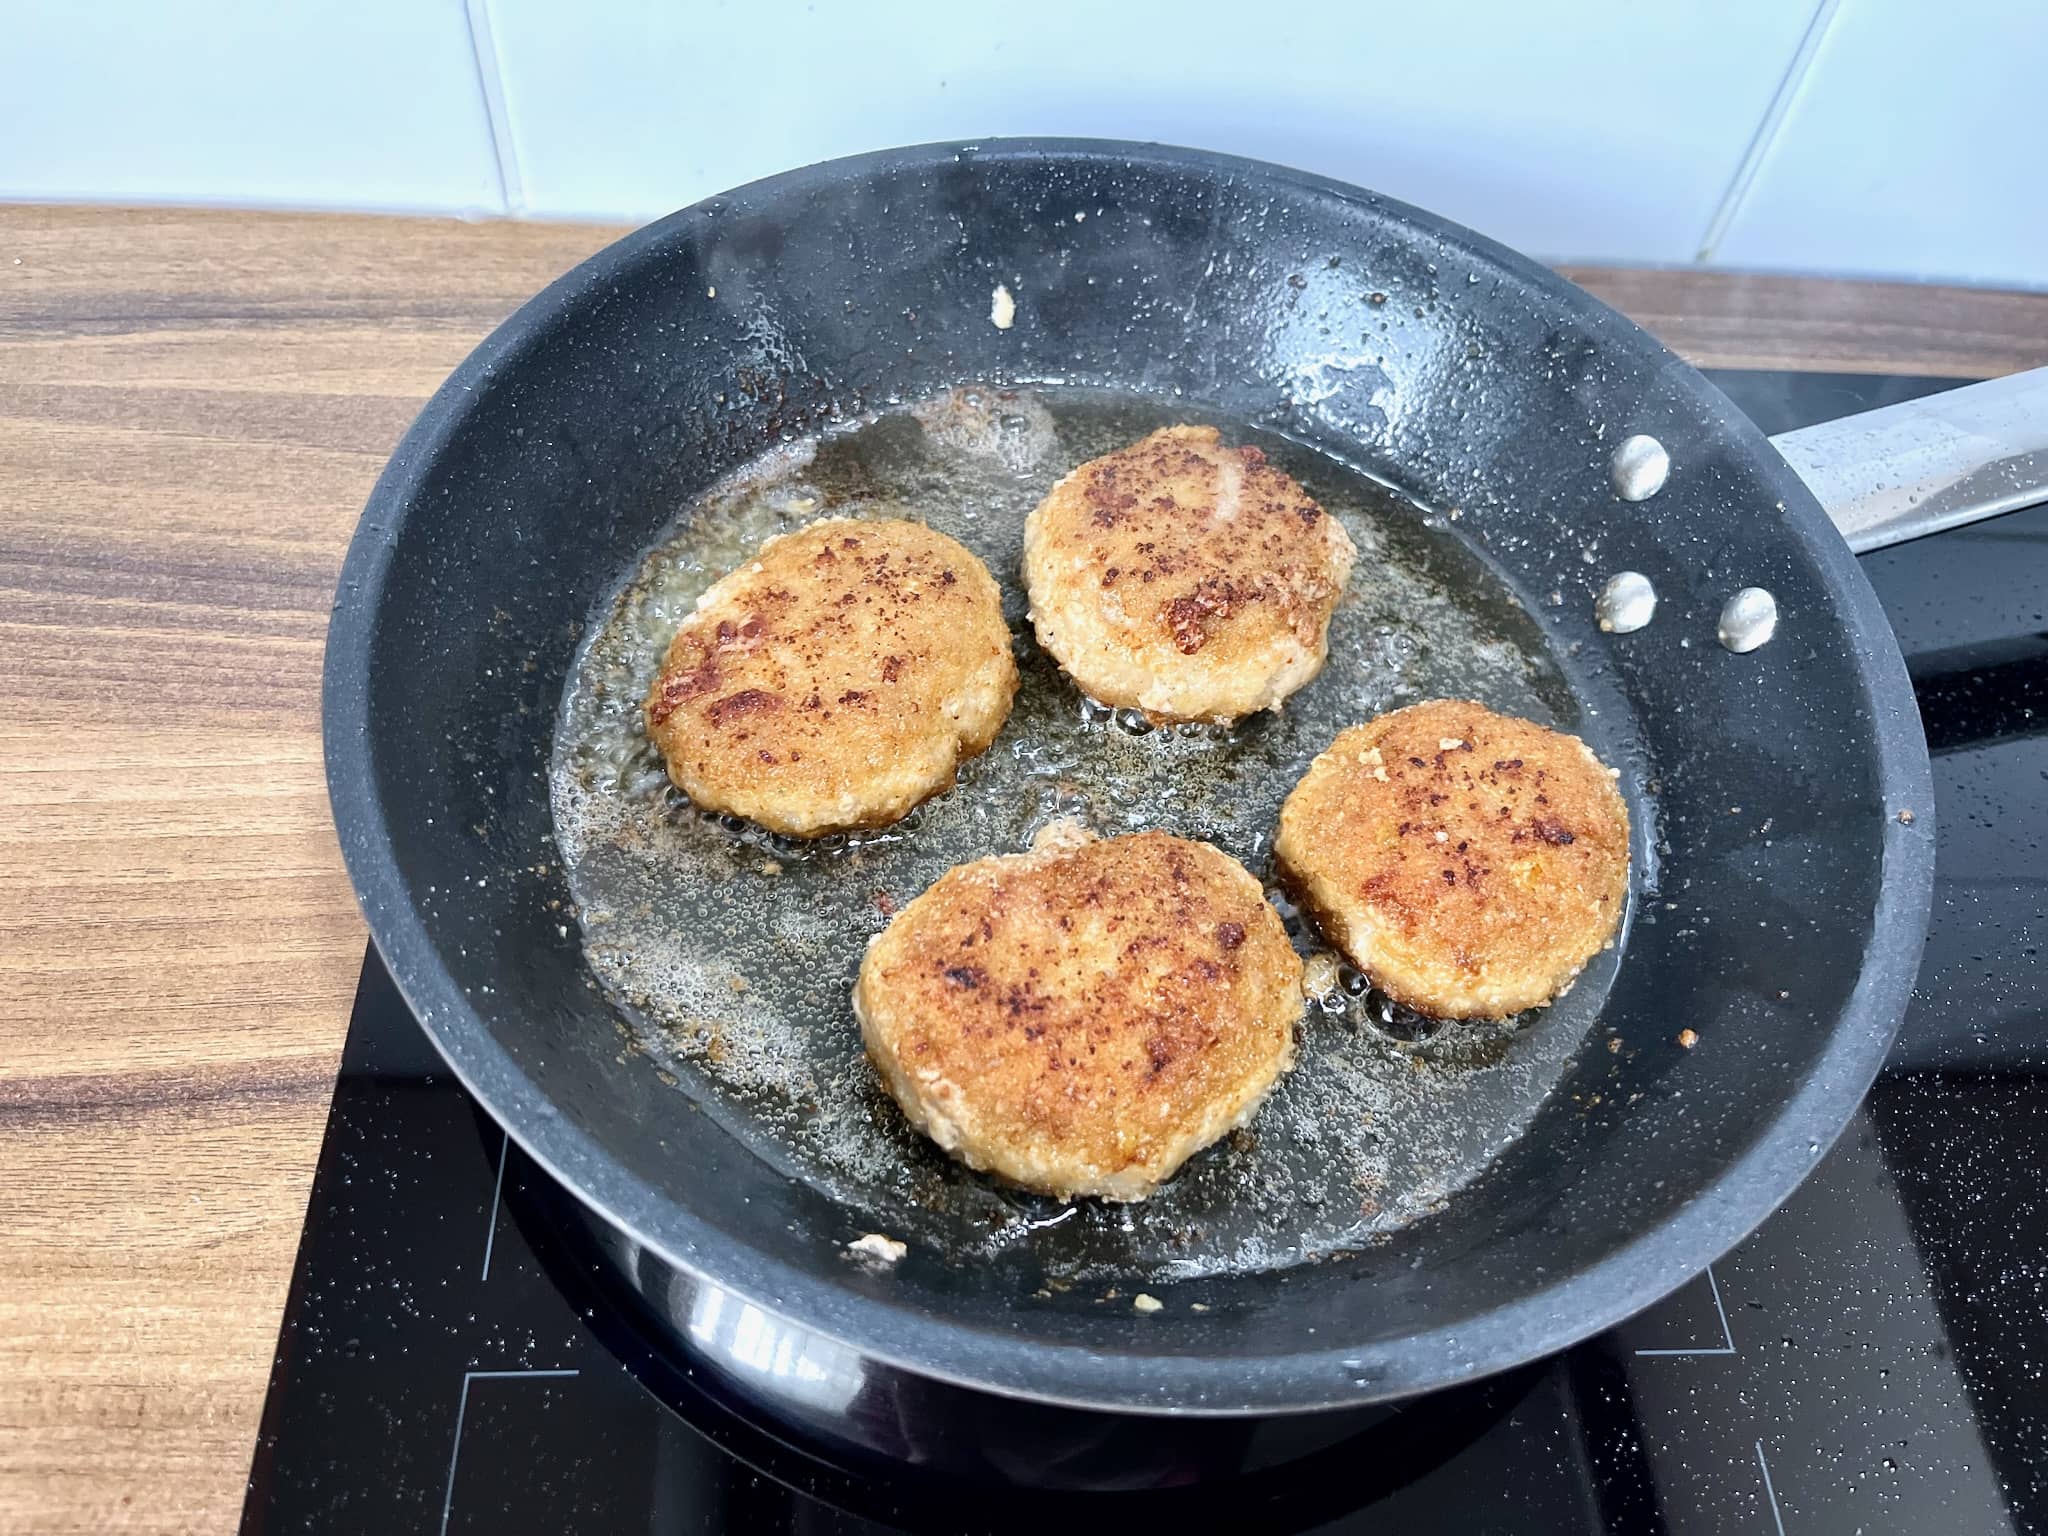 Frying Meat Patties in a frying pan on other side